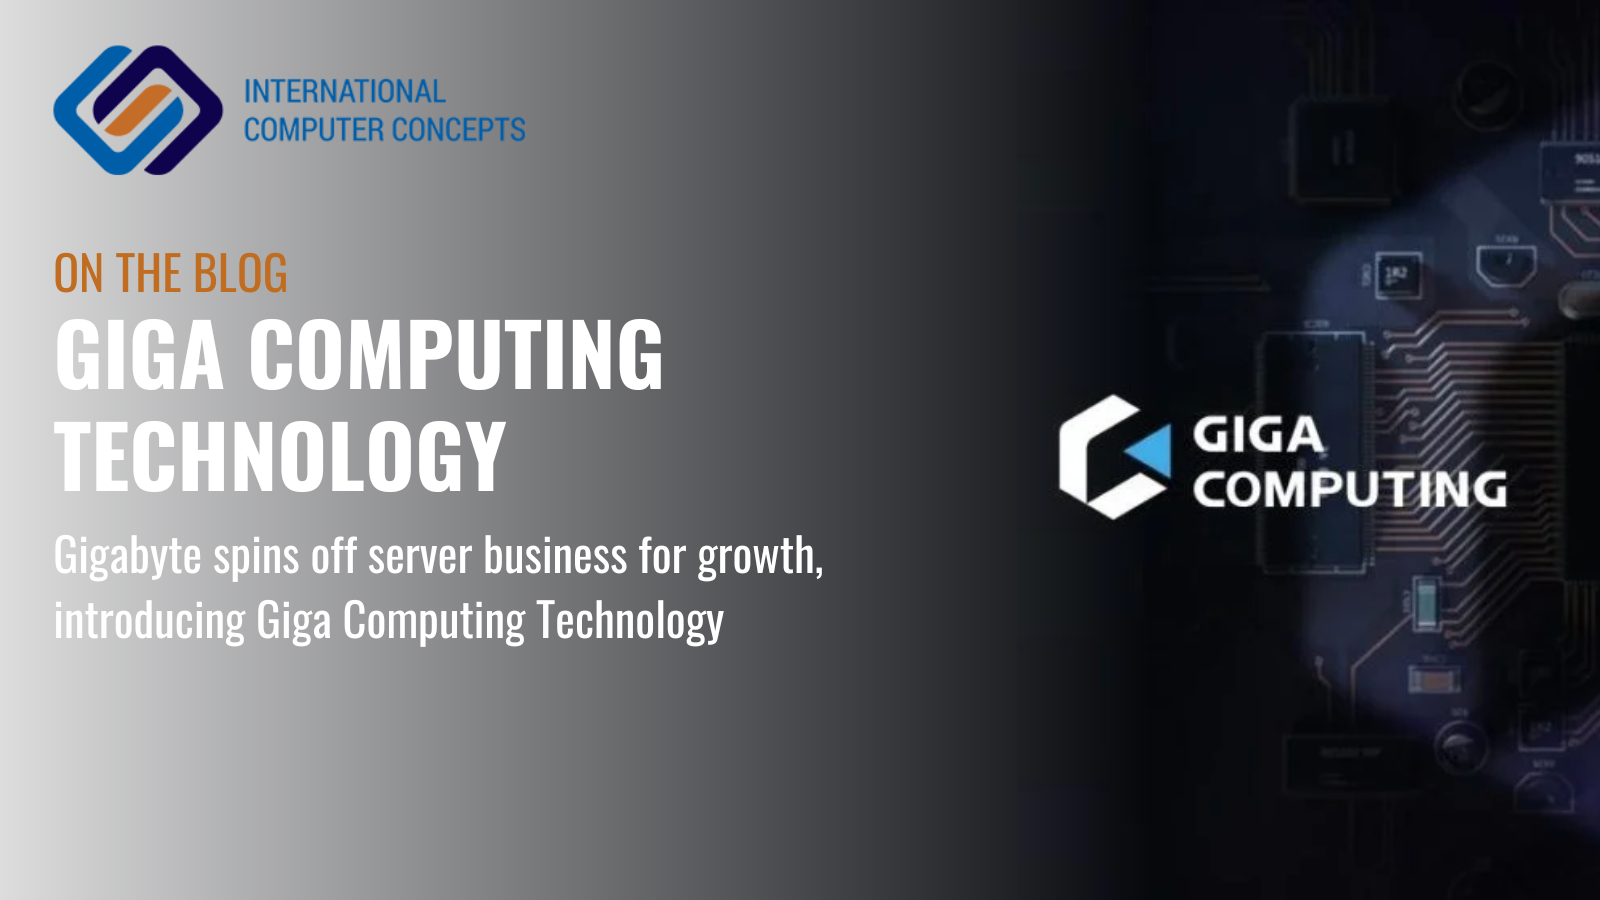 Gigabyte spins off server business for growth, introducing Giga Computing Technology